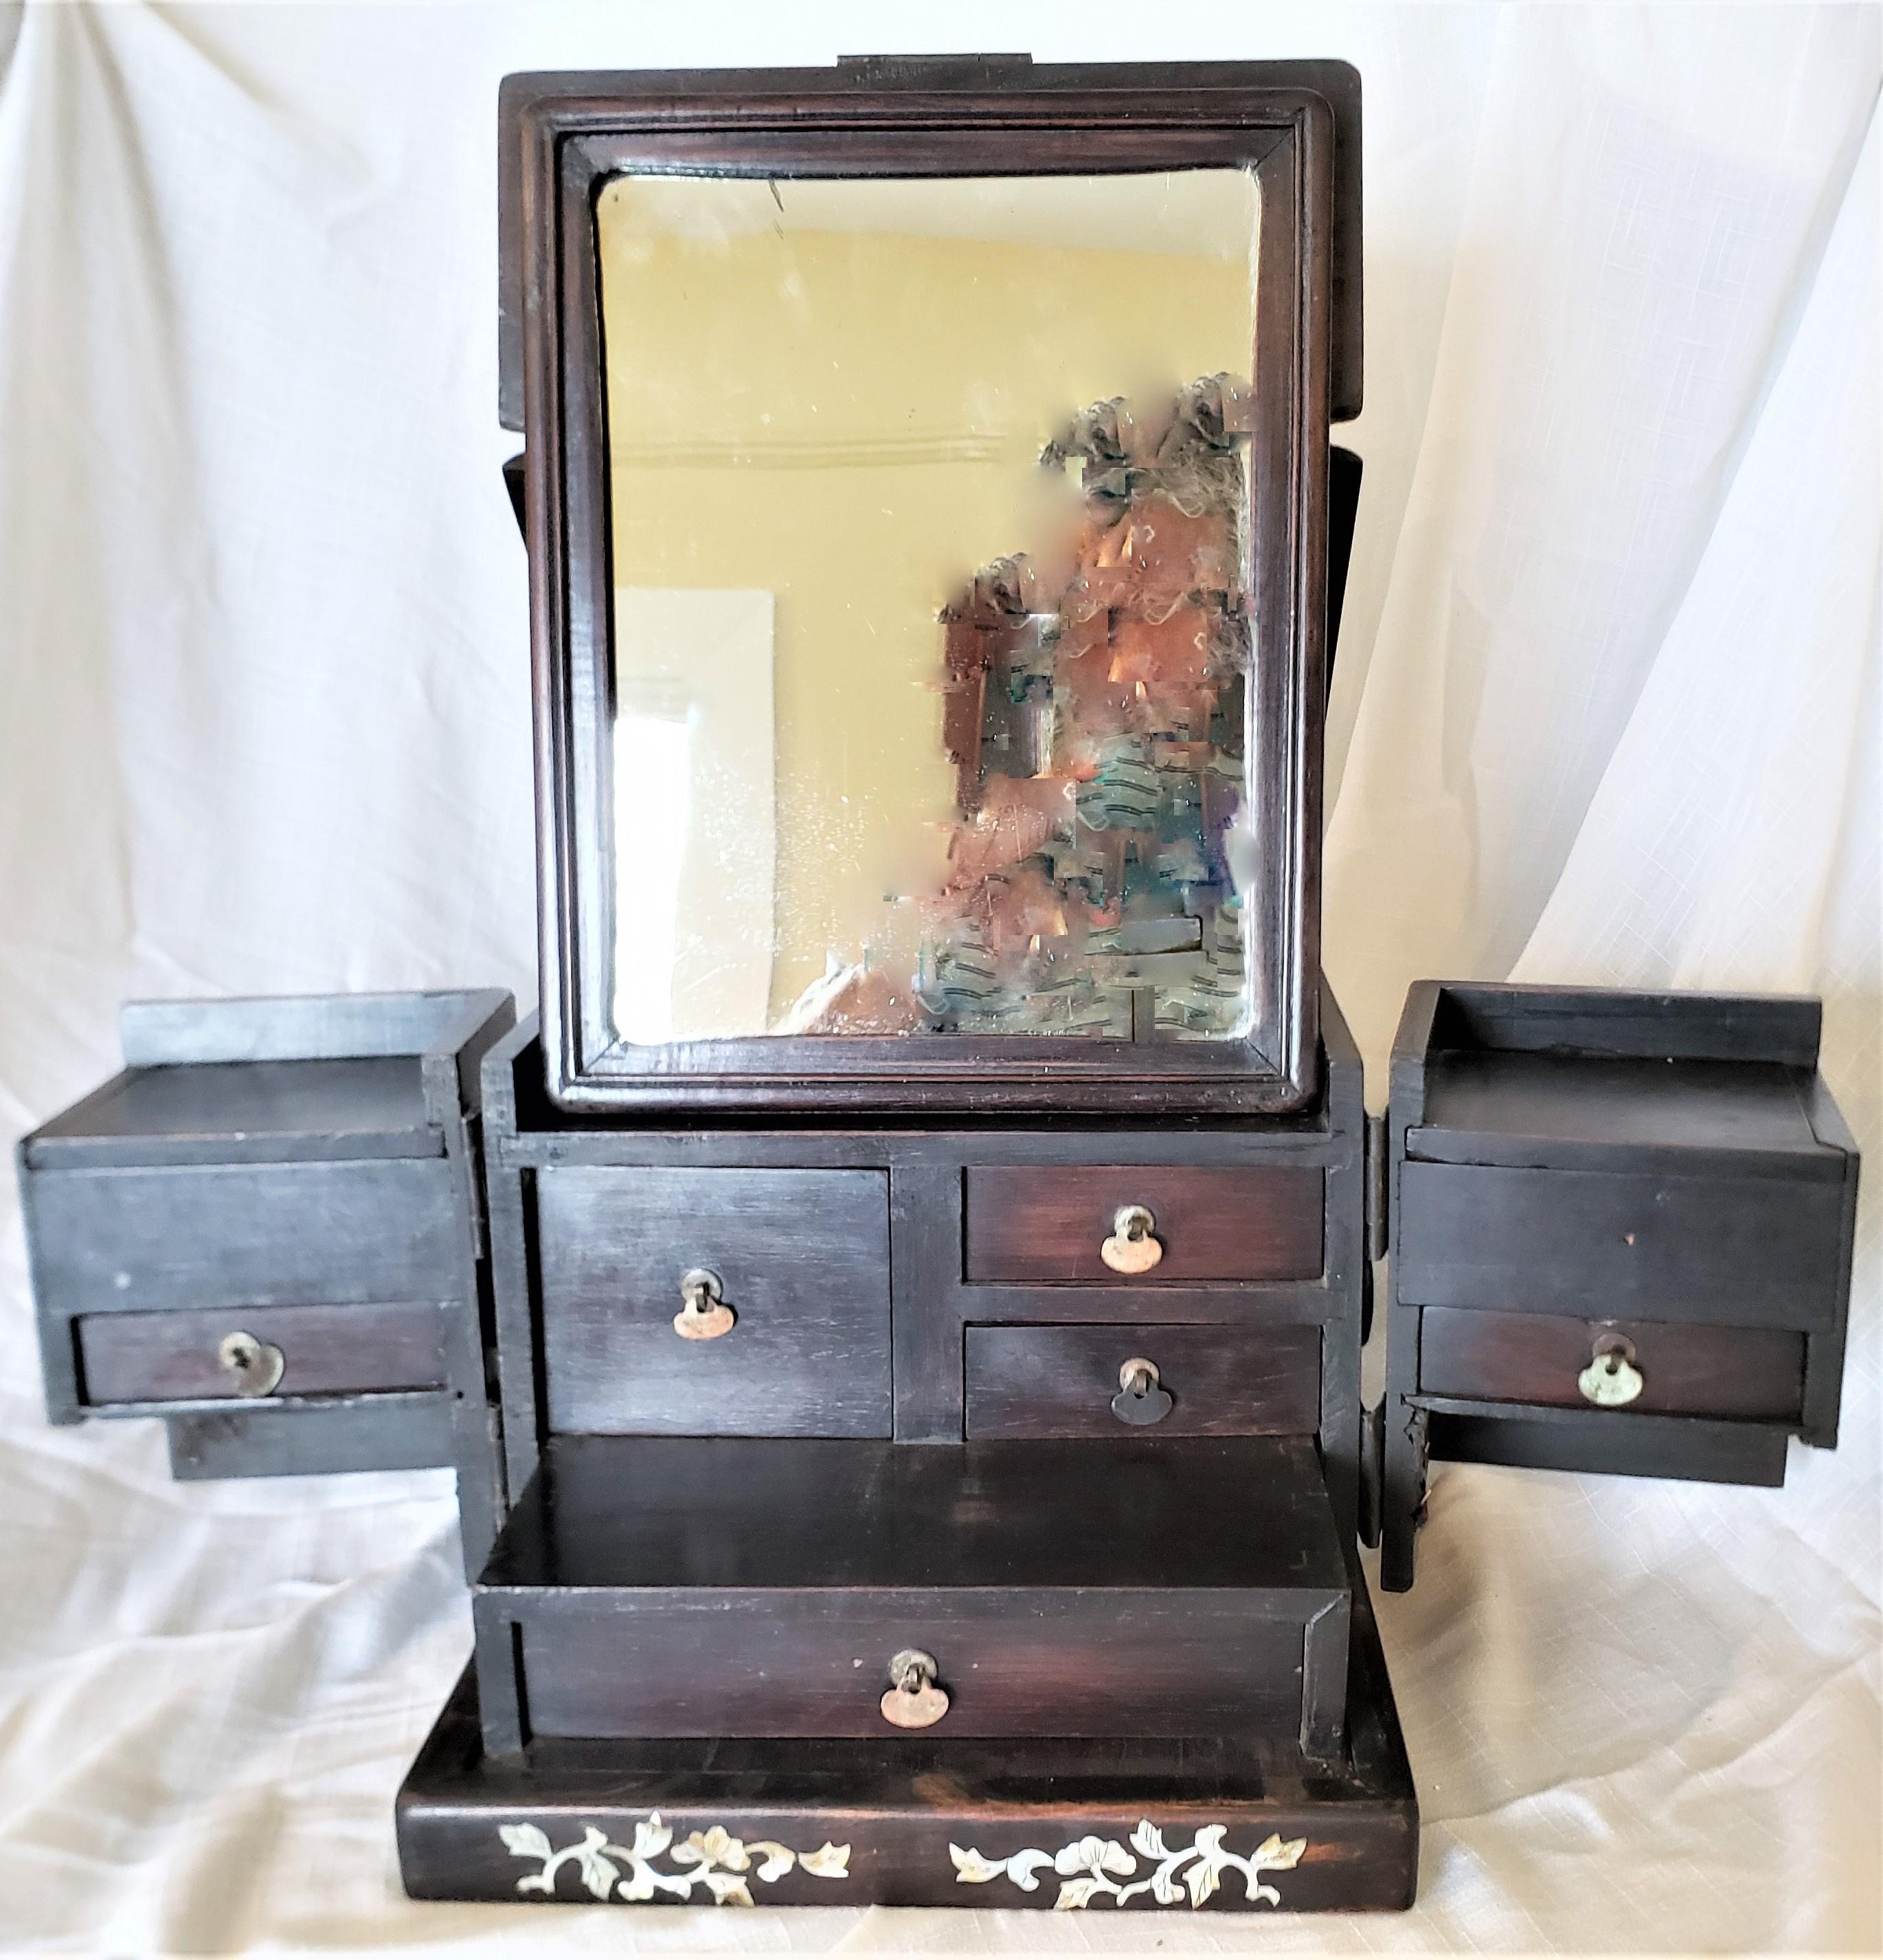 19th Century Antique Chinese Wooden Jewelry Box or Vanity Dresser Chest with Intricate Inlay For Sale